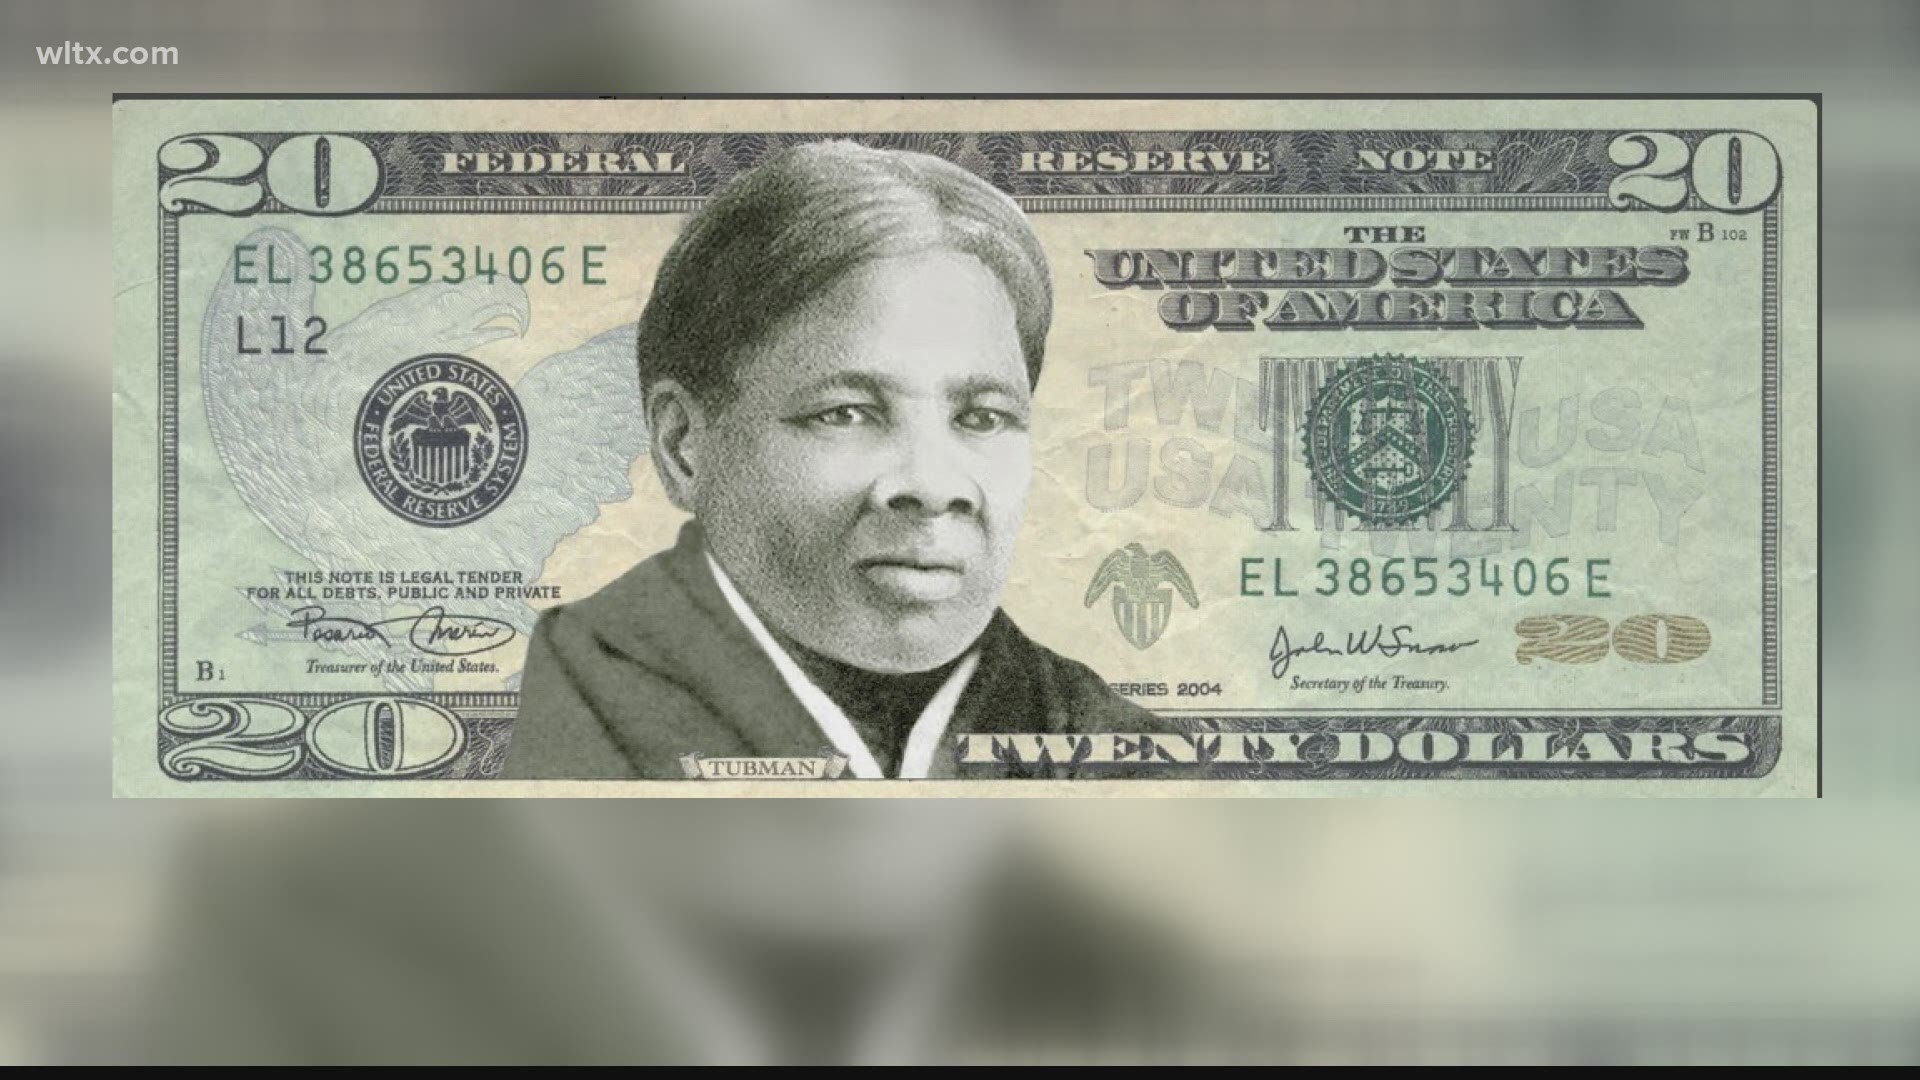 The unveiling of the redesigned $20 bill was originally set to coincide with the 100th anniversary of passage of the 19th Amendment giving women the right to vote.